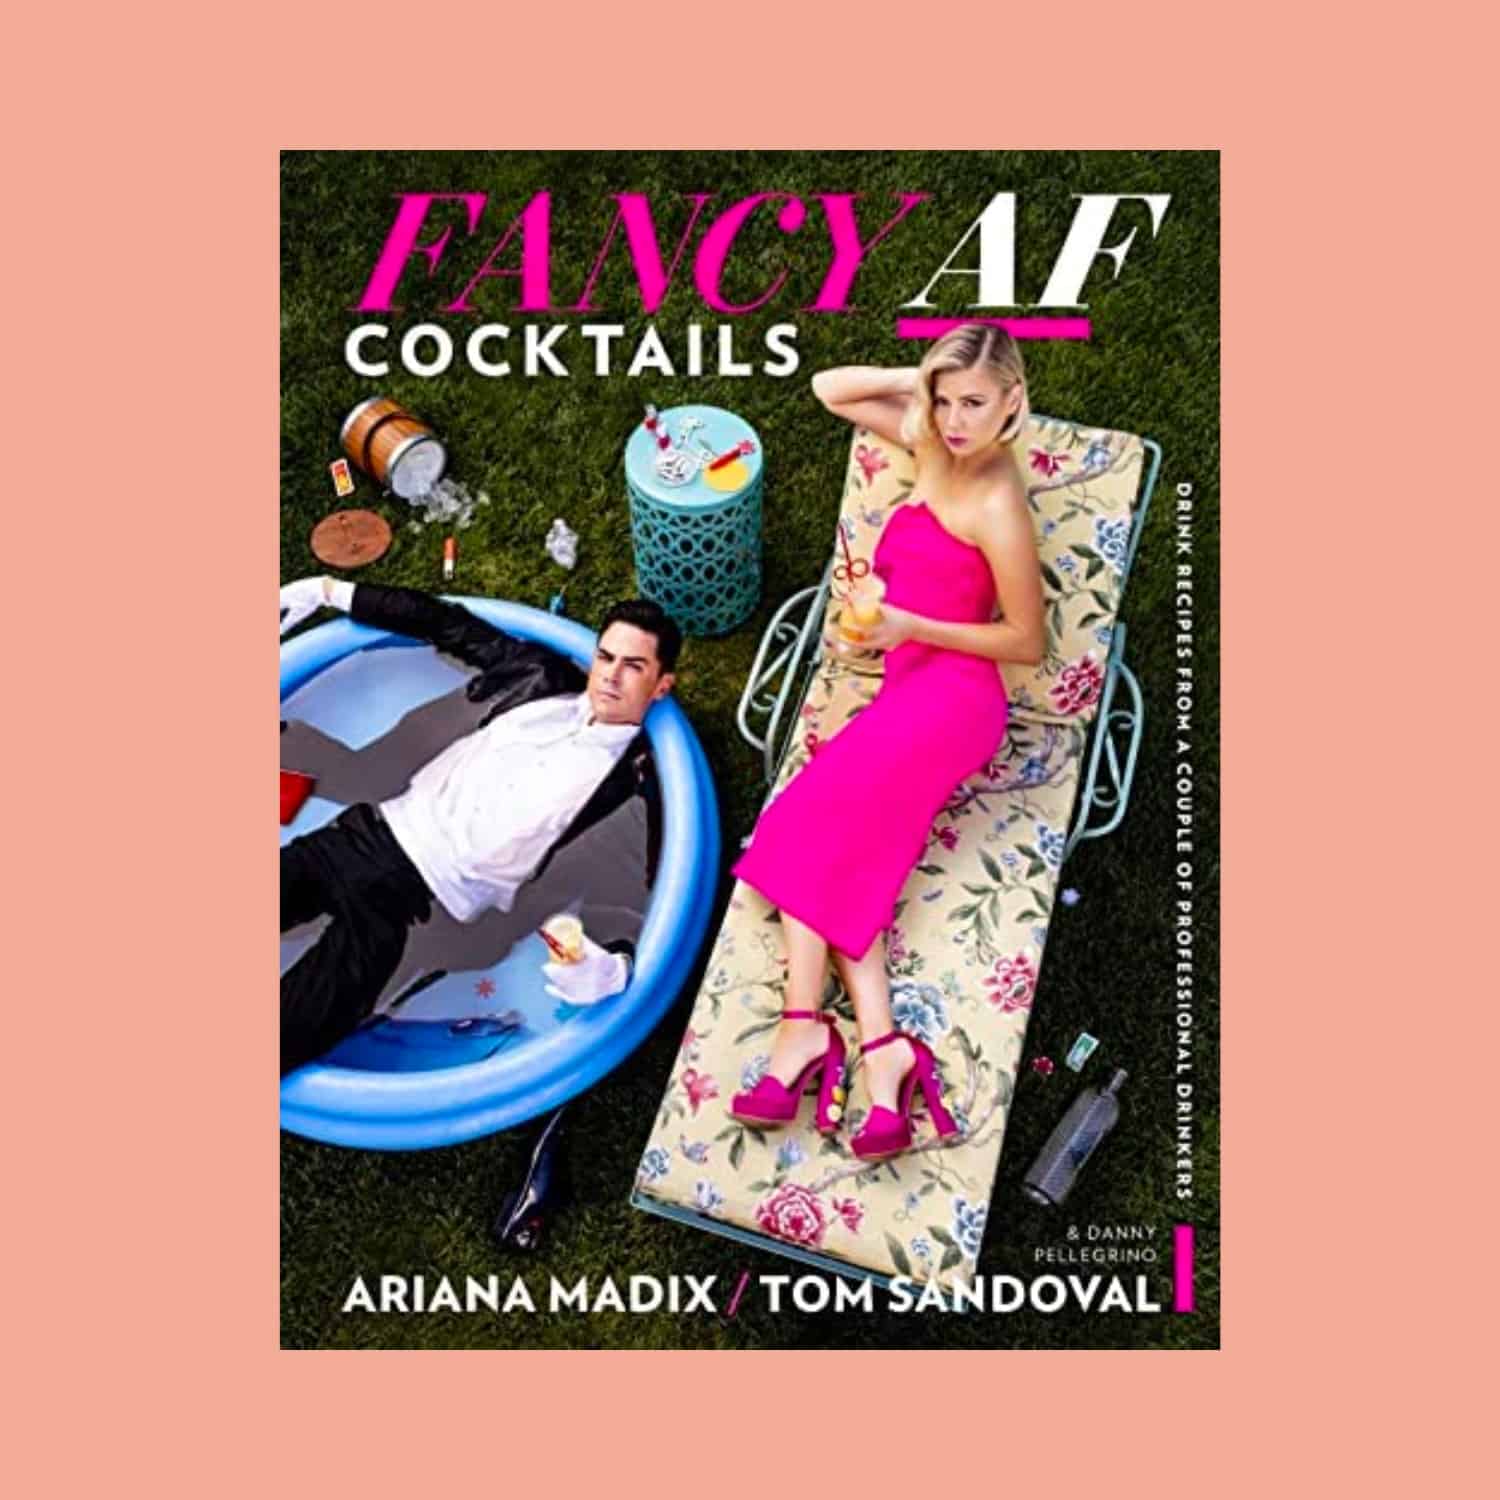 Best booze and cocktail coffee table books to style your home or give as a gift.